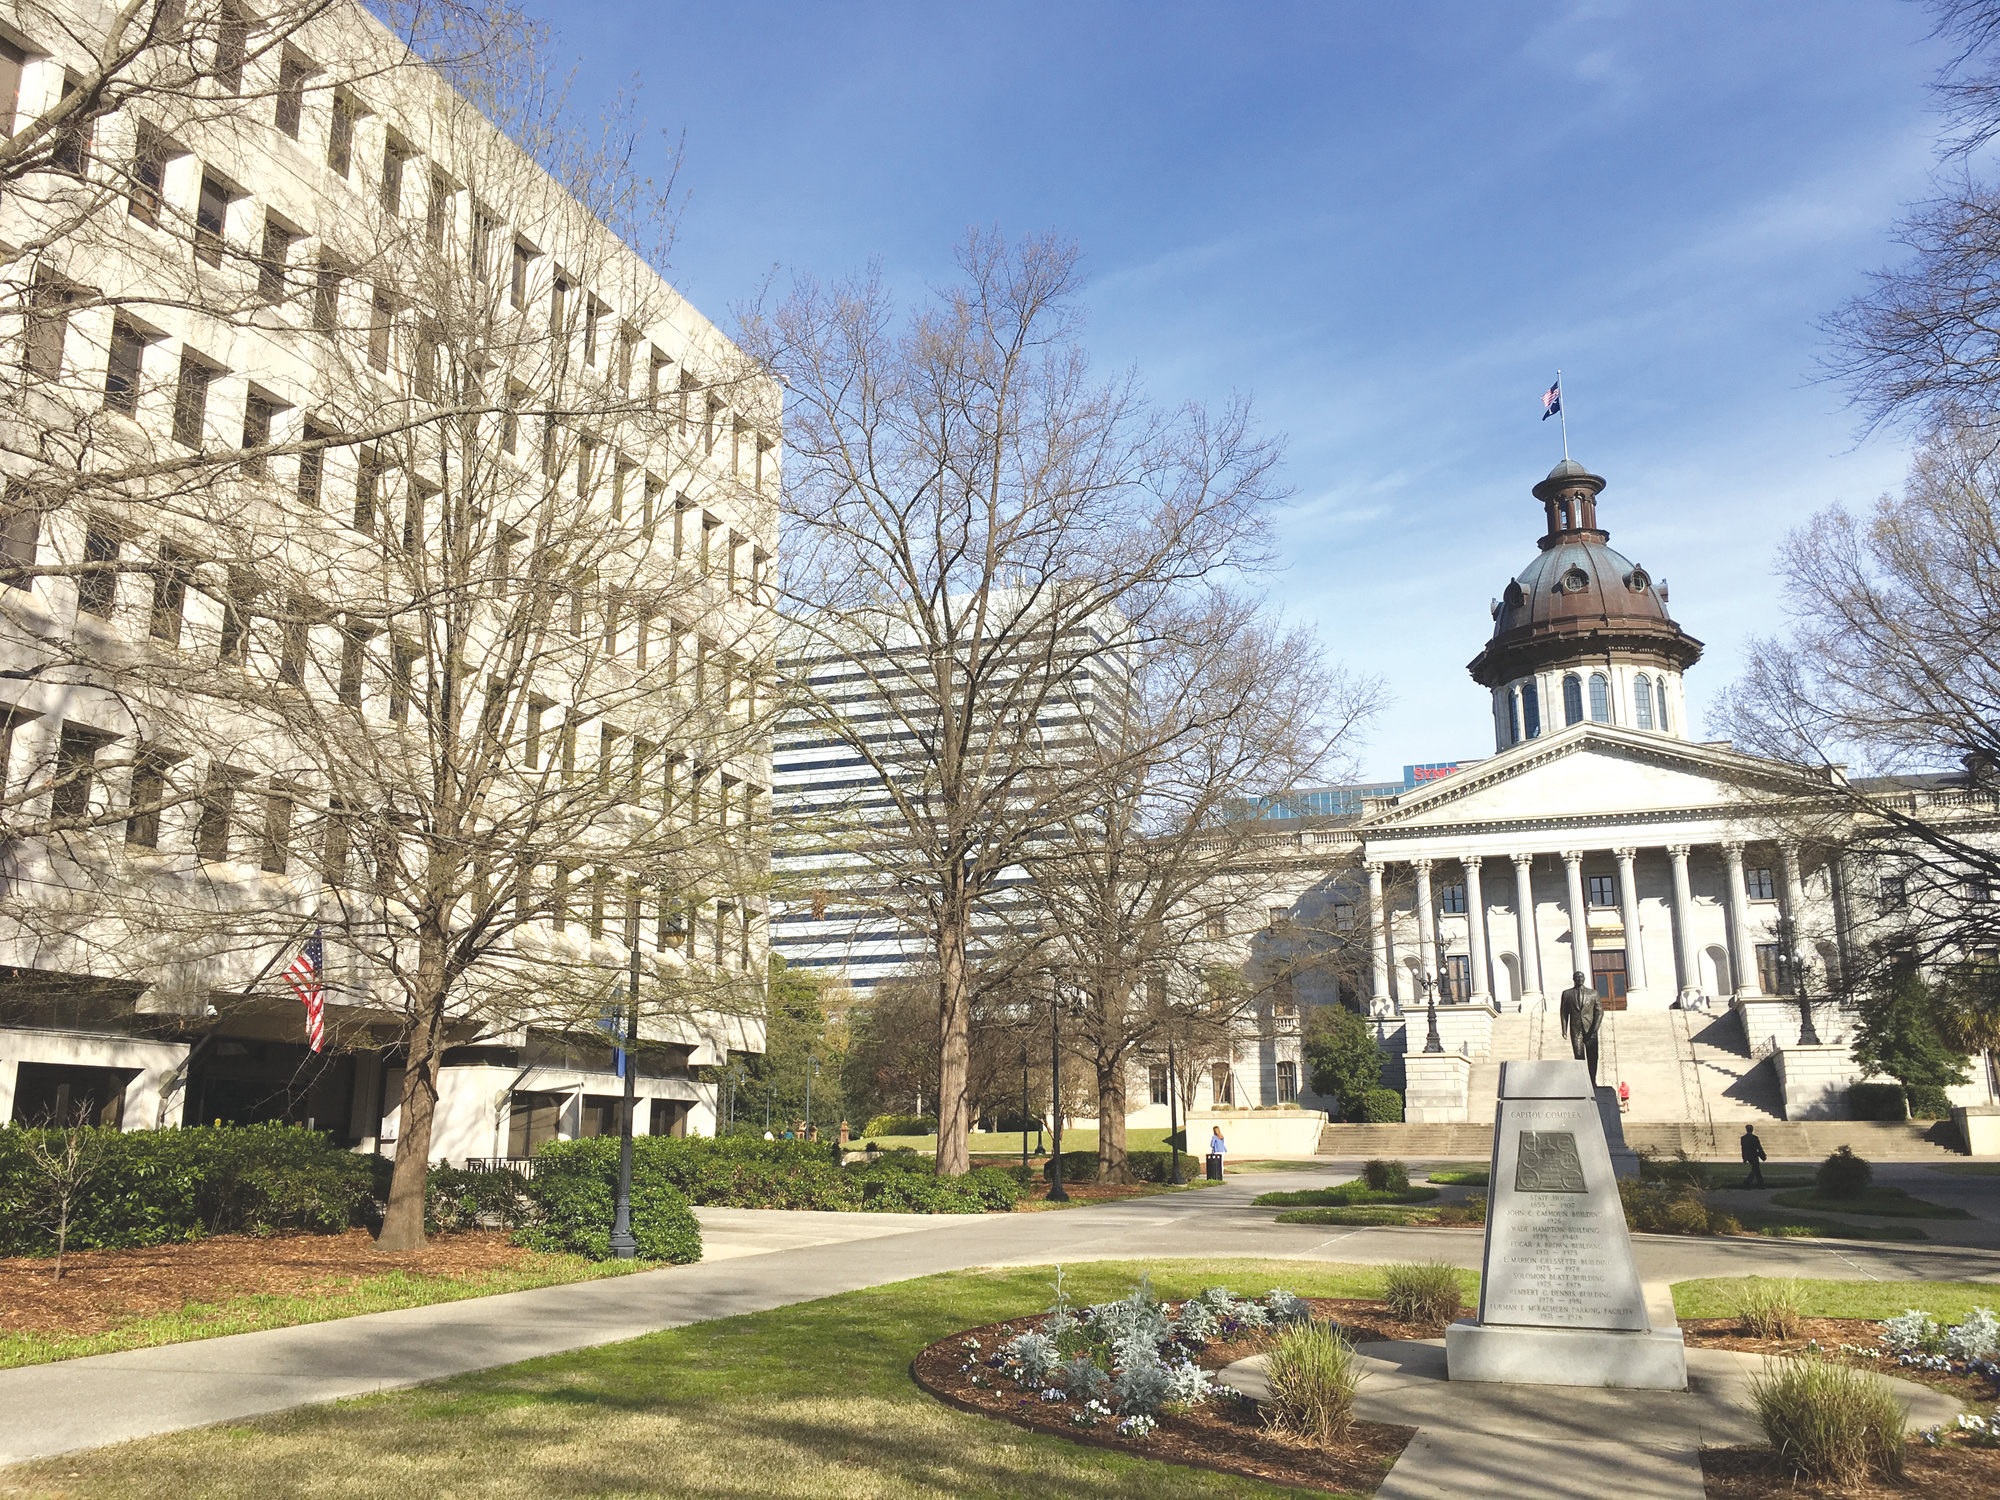 The Gressette Office Building at the Statehouse in Columbia is seen recently.